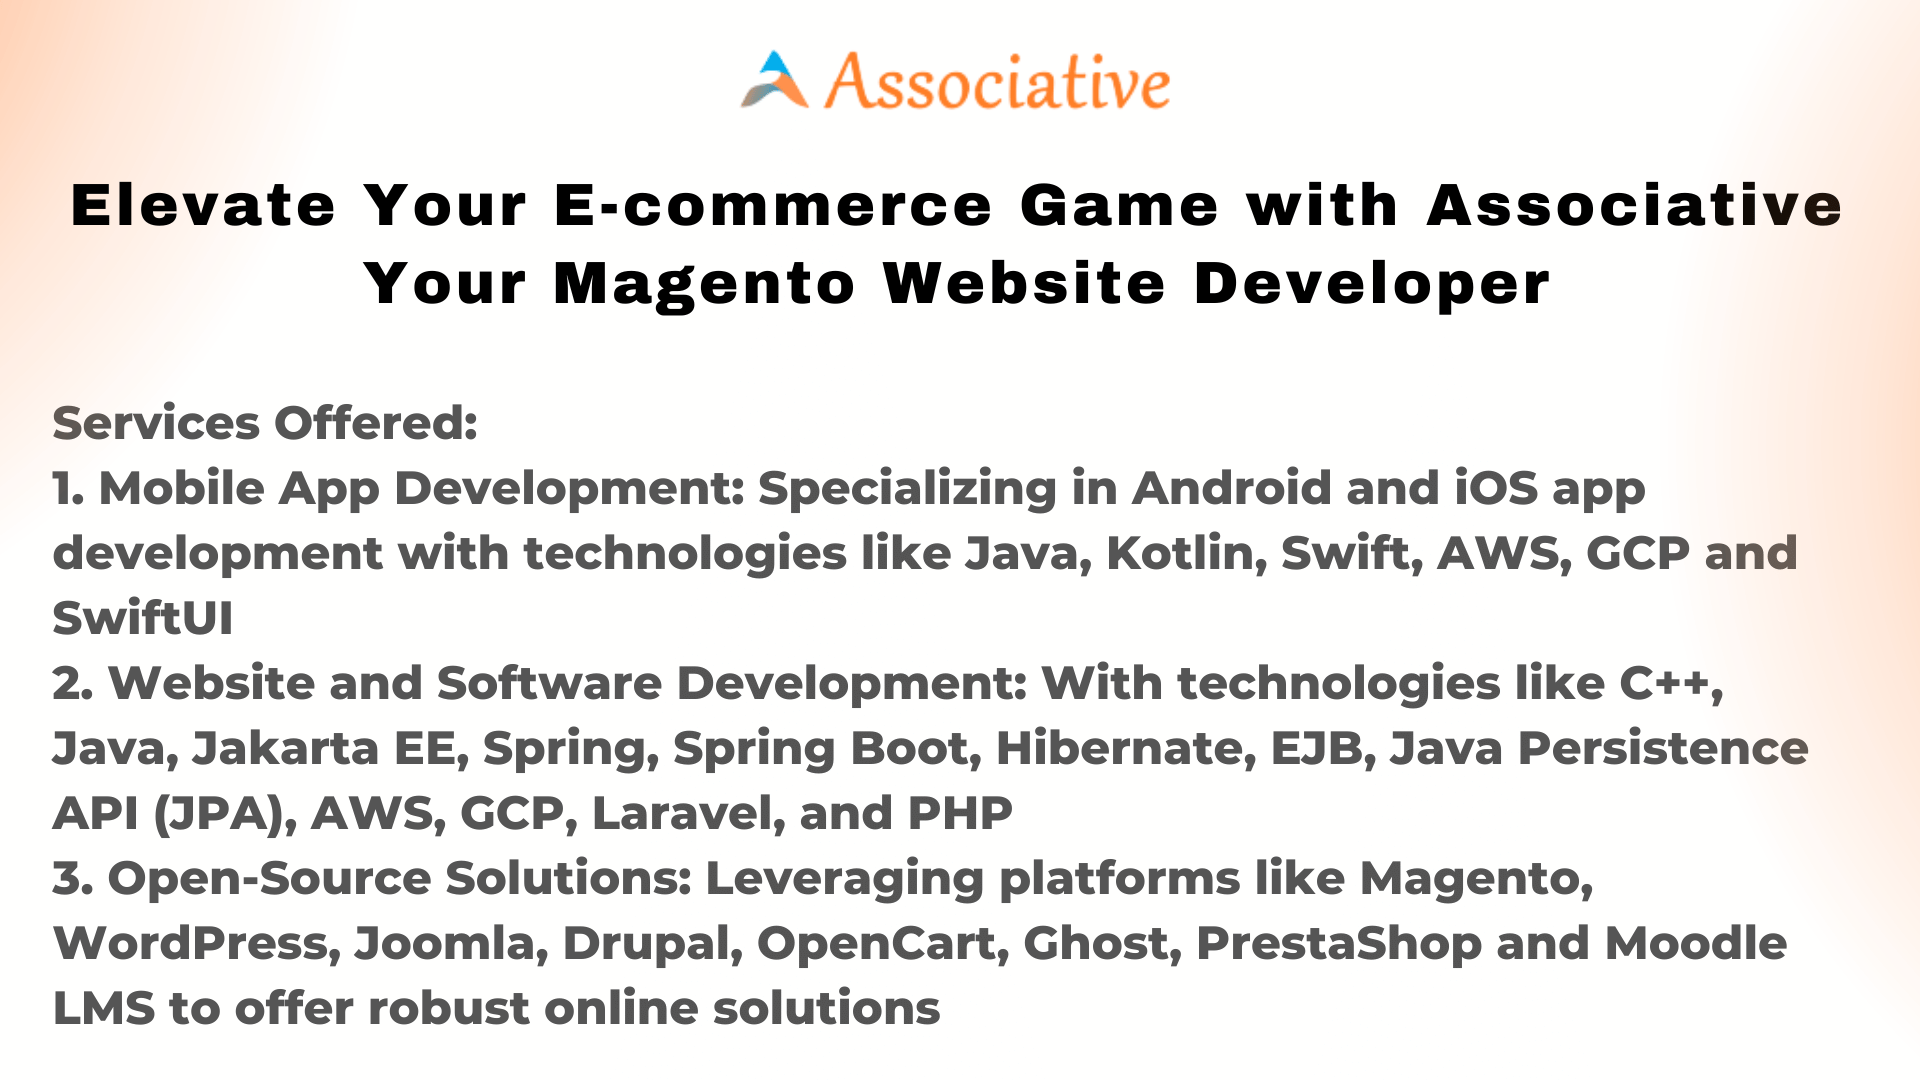 Elevate Your E-commerce Game with Associative Your Magento Website Developer